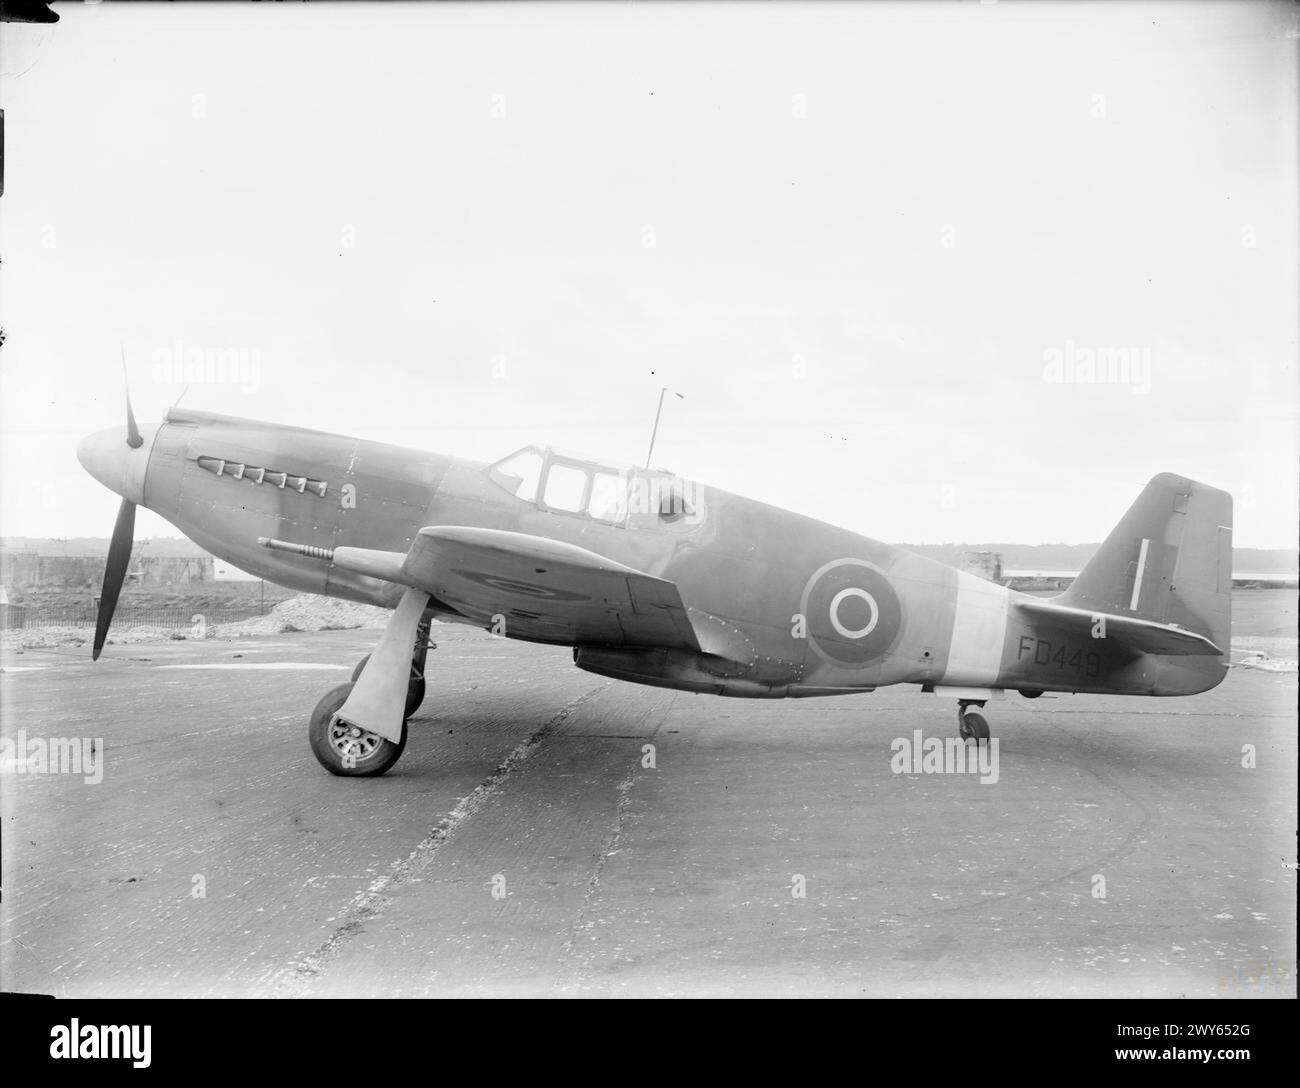 AMERICAN AIRCRAFT IN ROYAL AIR FORCE SERVICE, 1939-1945: NORTH AMERICAN NA-73 & NA-102 MUSTANG. - Mustang Mark IA, FD449, on the ground at Air Services Training Ltd, Hamble, Hampshire, before issue to No. 268 Squadron RAF with whom it served in the tactical-reconnaissance role until 1944. Note the port-side oblique camera port aft of the cockpit. , Royal Air Force, Wing, 269 Stock Photo